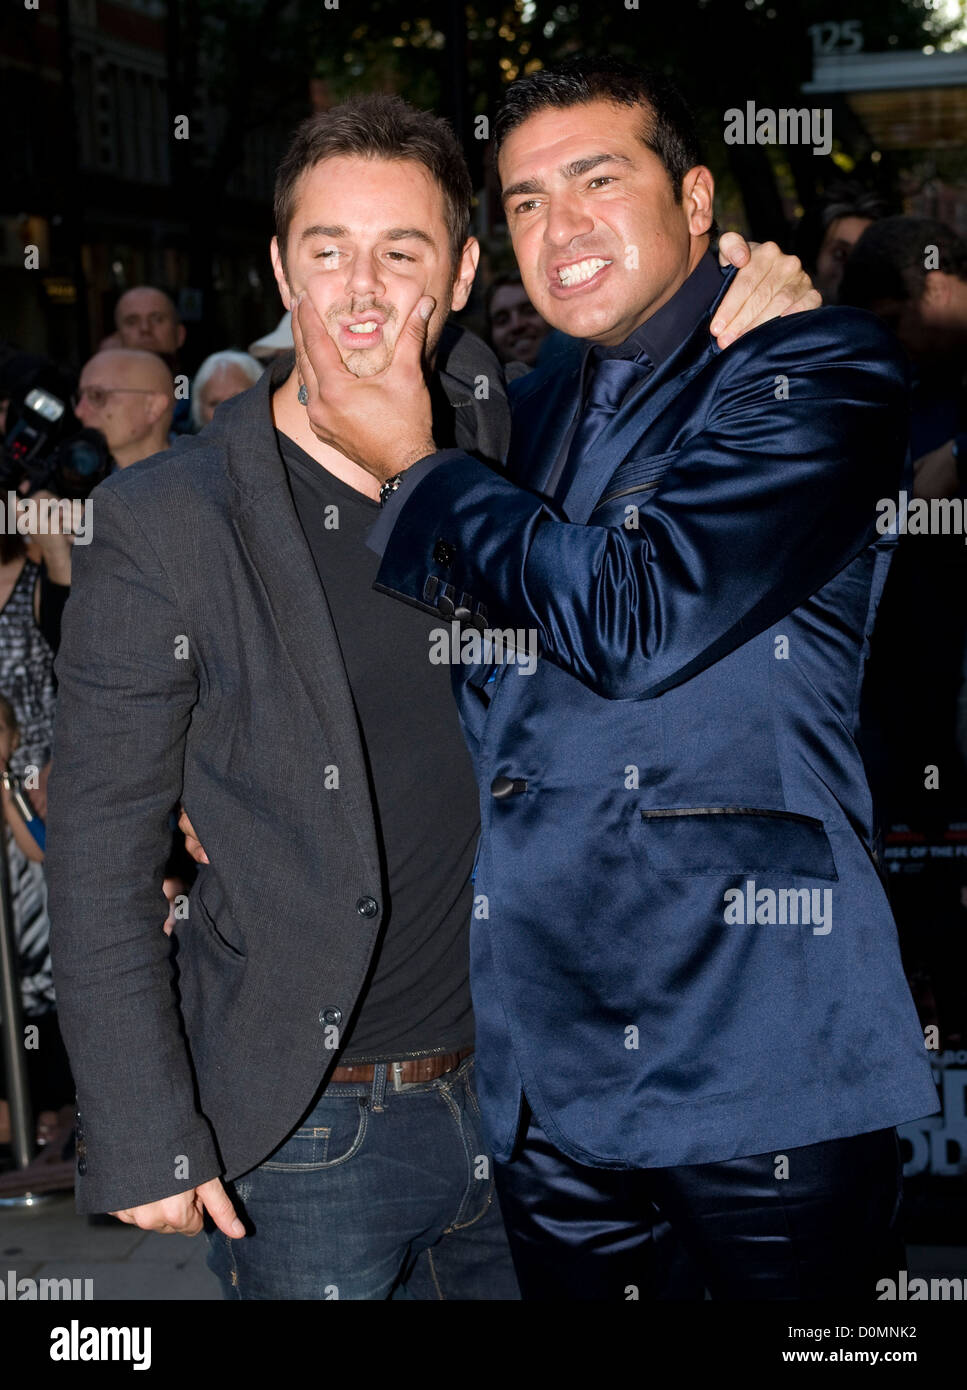 Danny Dyer (left) and Tamer Hassan 'Bonded By Blood' film premiere at the Odeon Covent Garden London, England - 31.08.10 Stock Photo